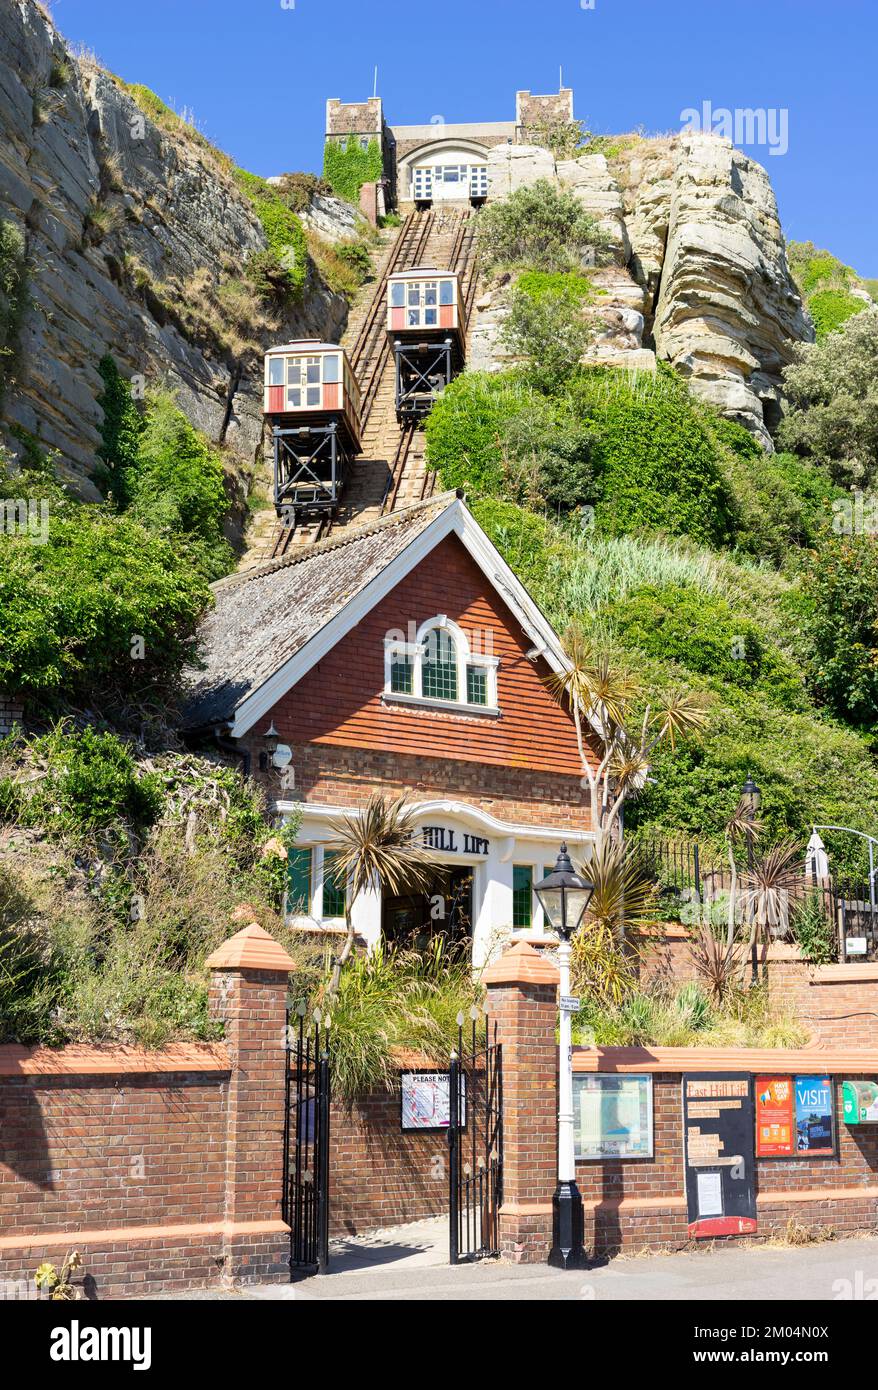 Hastings funicular East Hill Cliff Railway East Hill Lift Funicular cliff beach railway at Hastings East Sussex England GB UK Europe Stock Photo